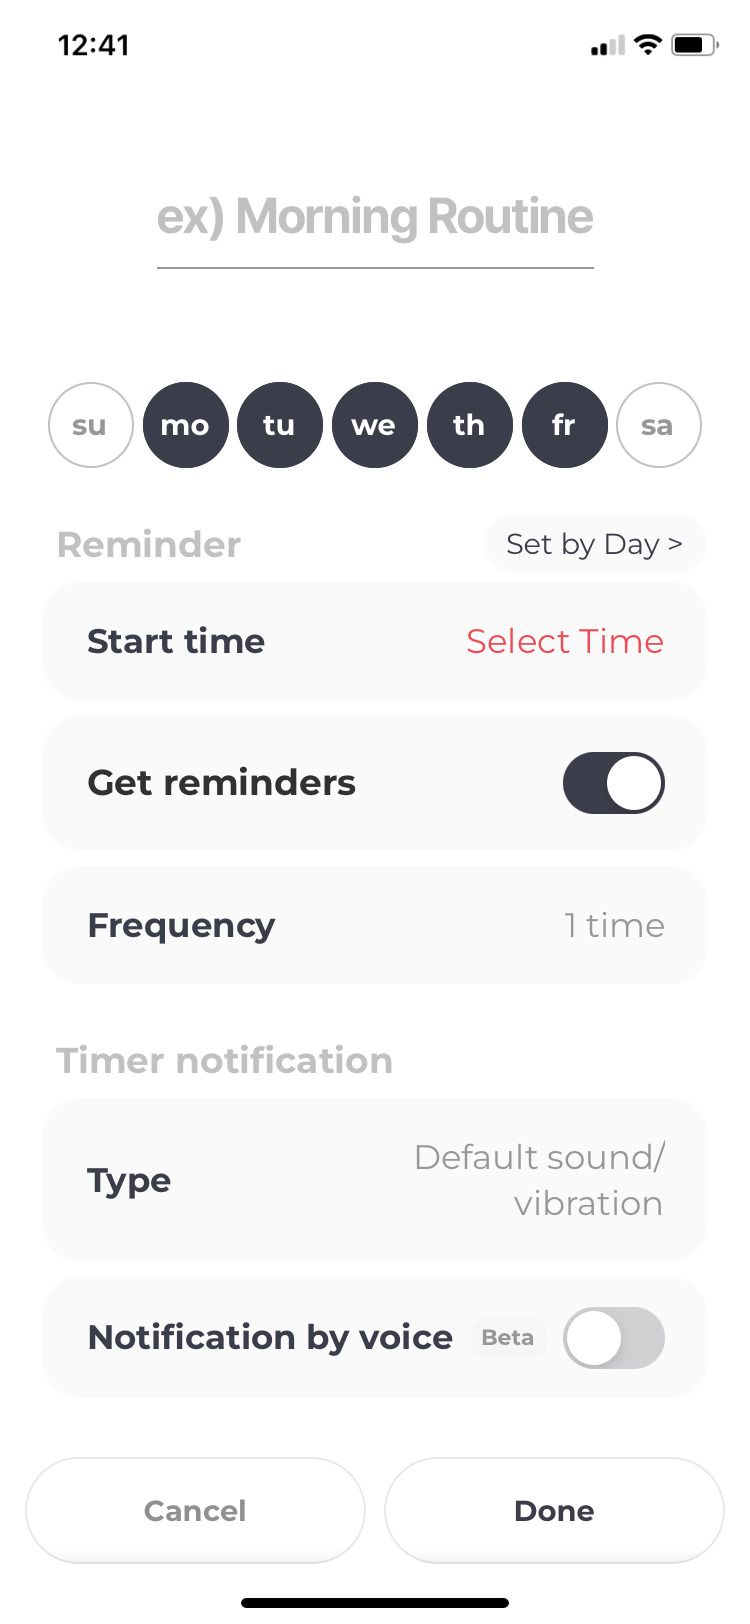 Routinery app routine template